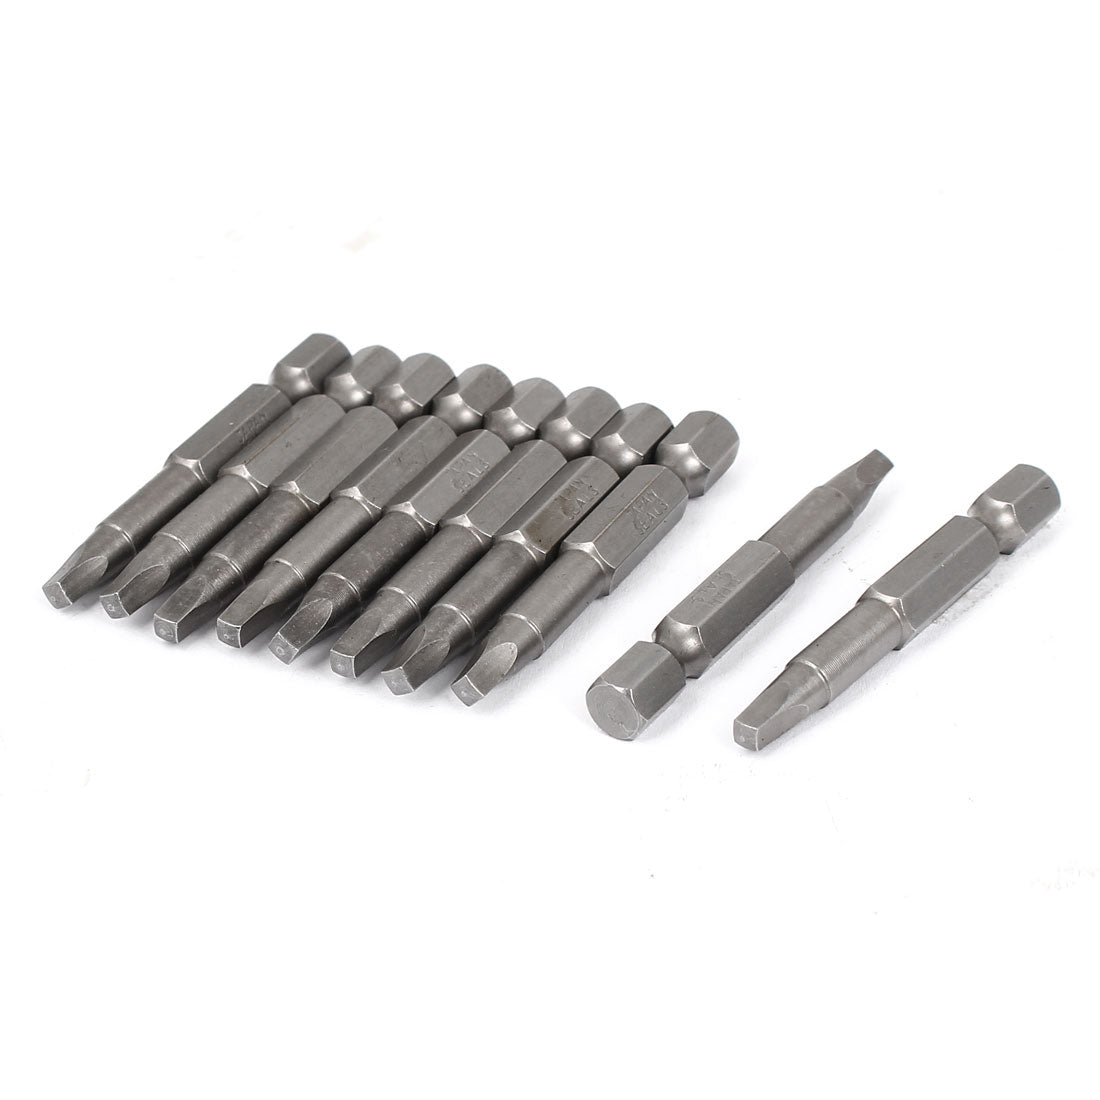 uxcell Uxcell 50mm Length 1/4" Hex Shank S2 Magnetic Square Screwdriver Bits 10pcs